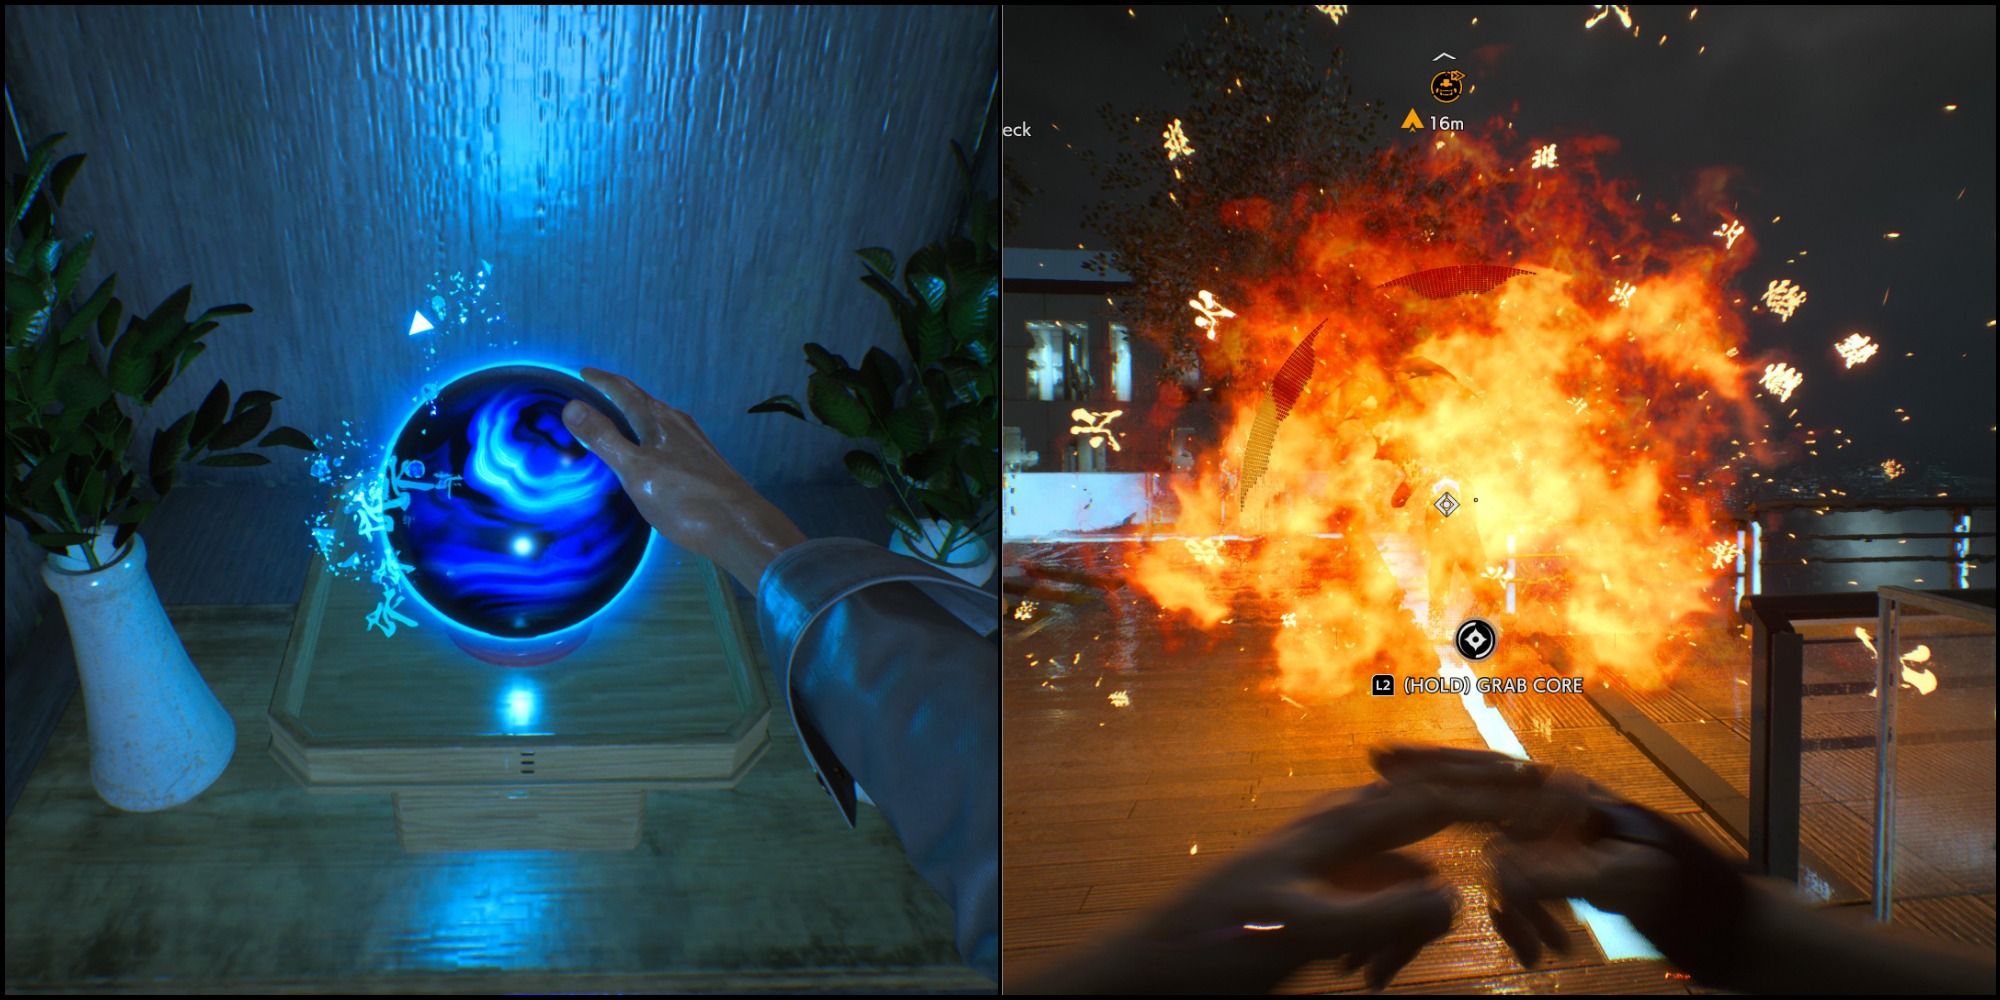 A split image of a blue sphere on the left and a big fire explosion on the right.